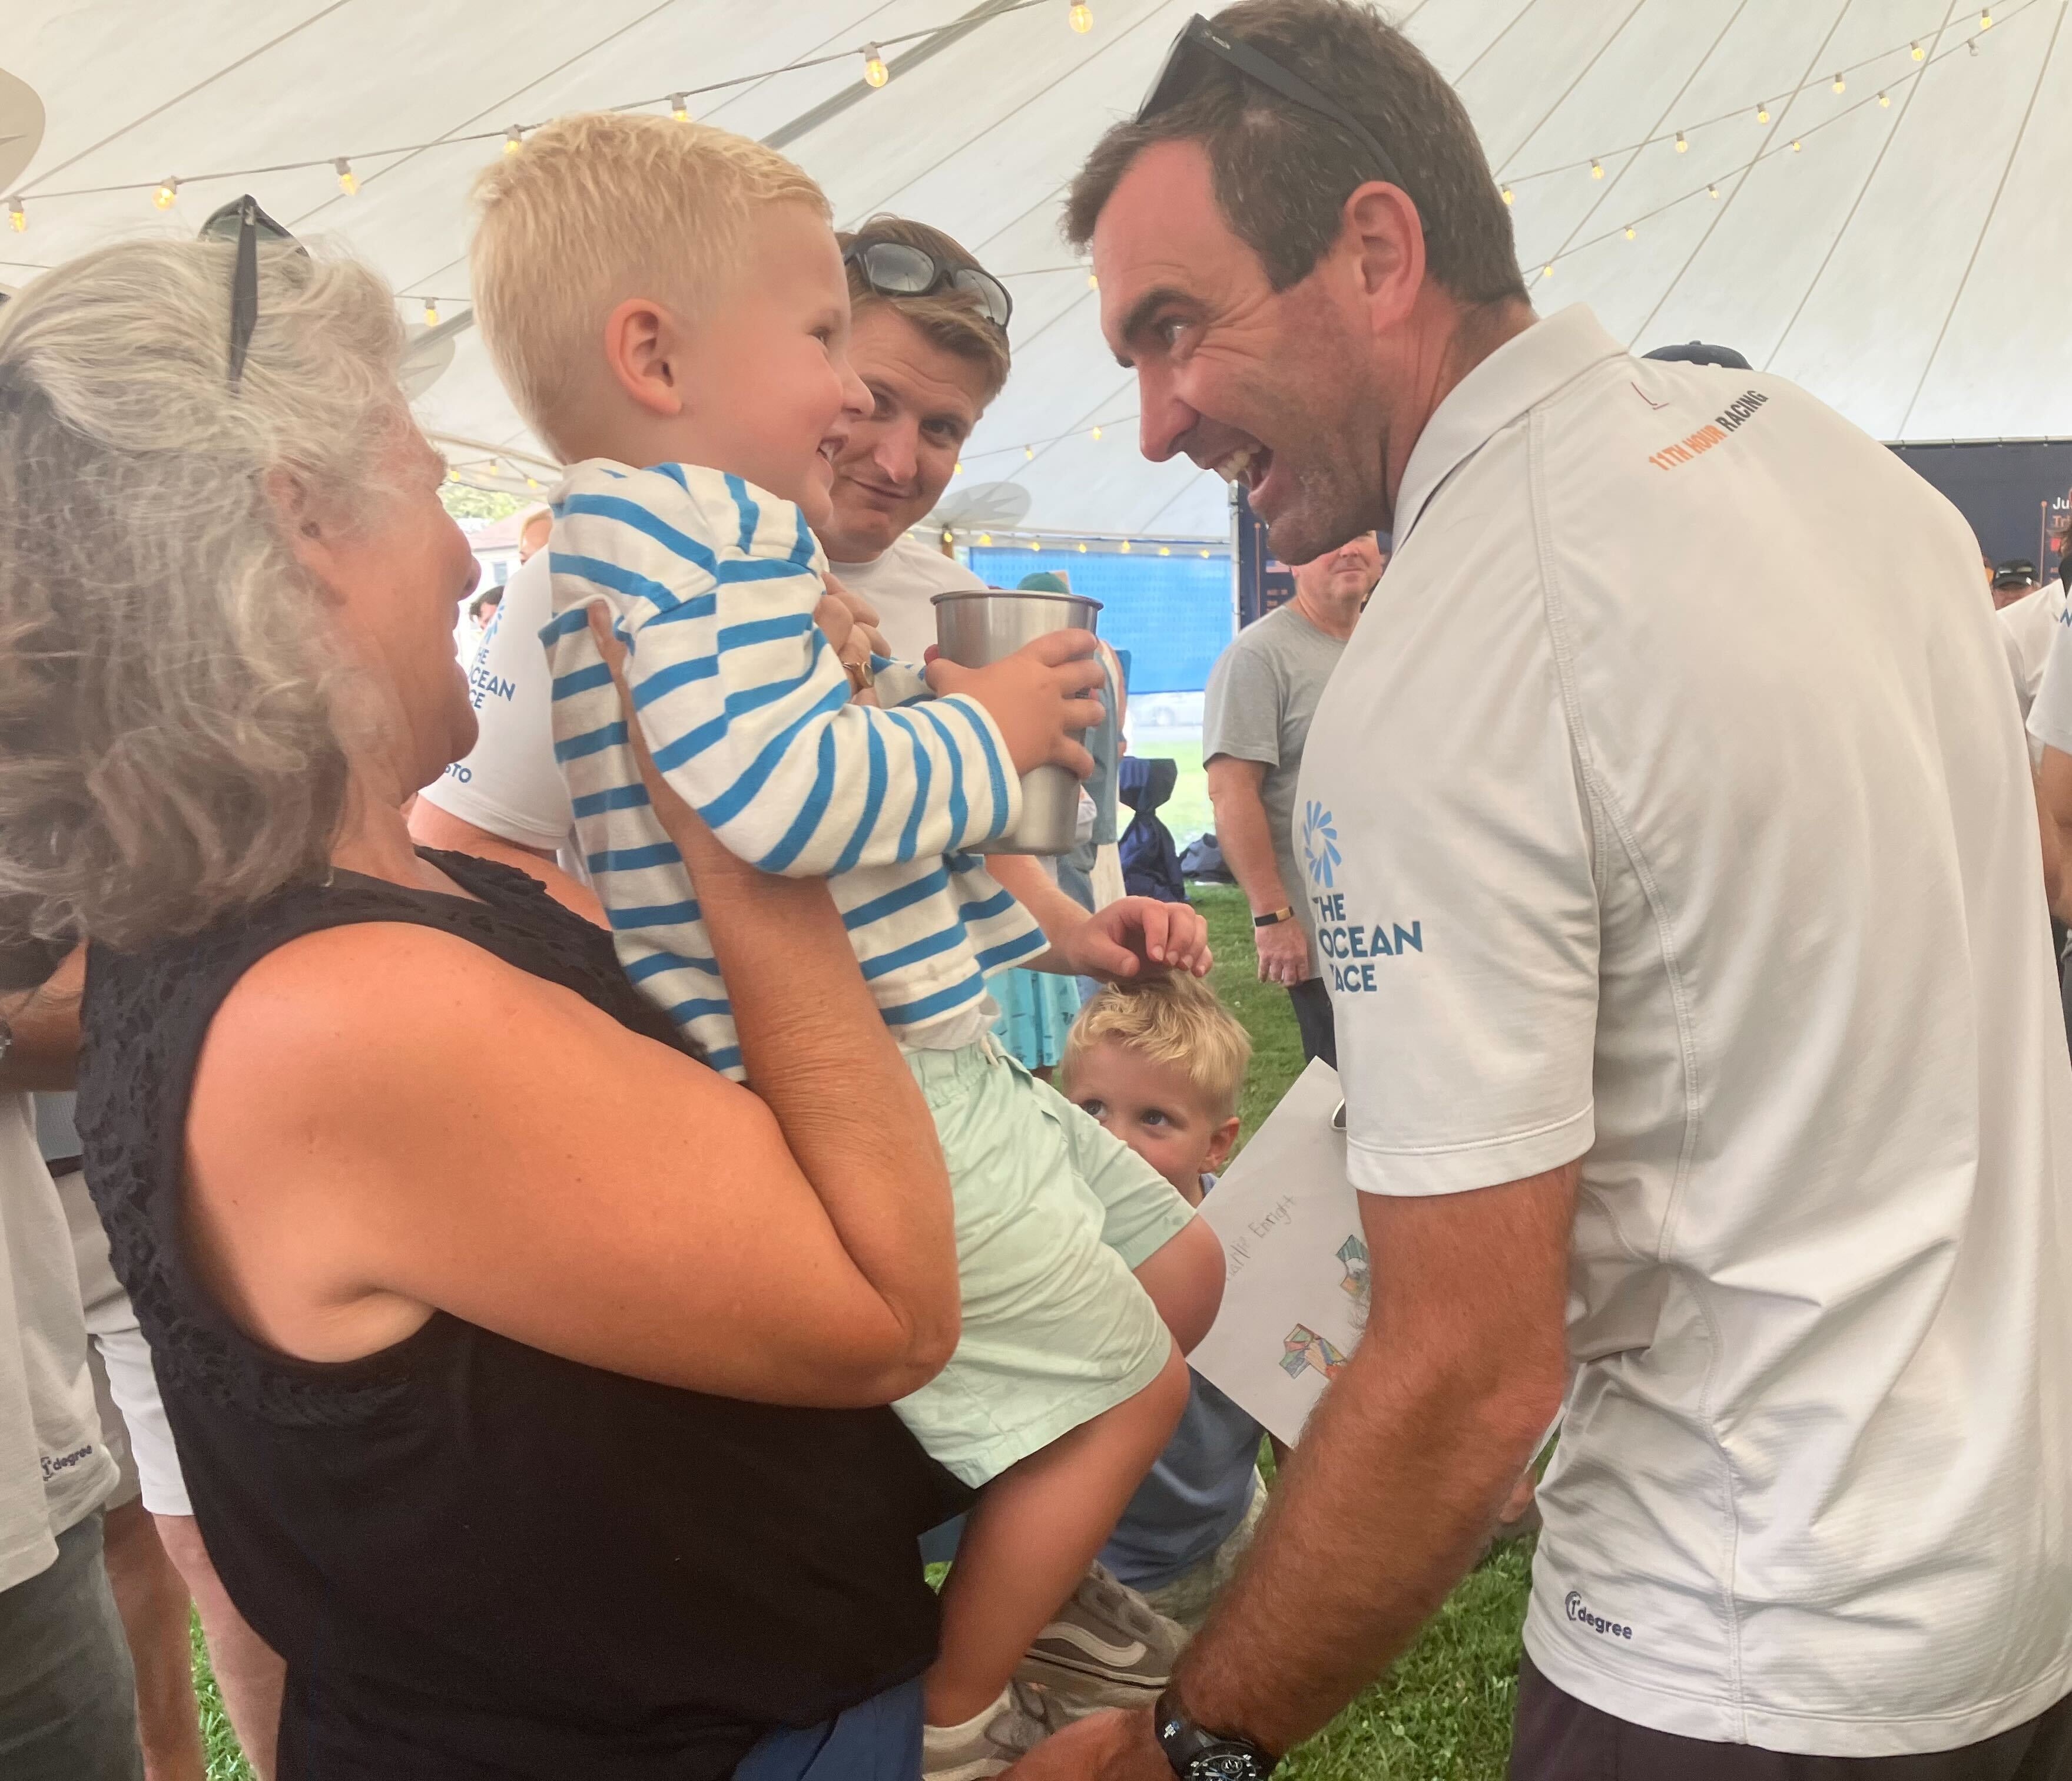 Skipper Charlie Enright, of Bristol, greets a young fan at the community celebration event of the 11th Hour Racing team's victory in the round-the-world Ocean Race in Newport on Friday, August 4, 2023. Enright and the 11th 